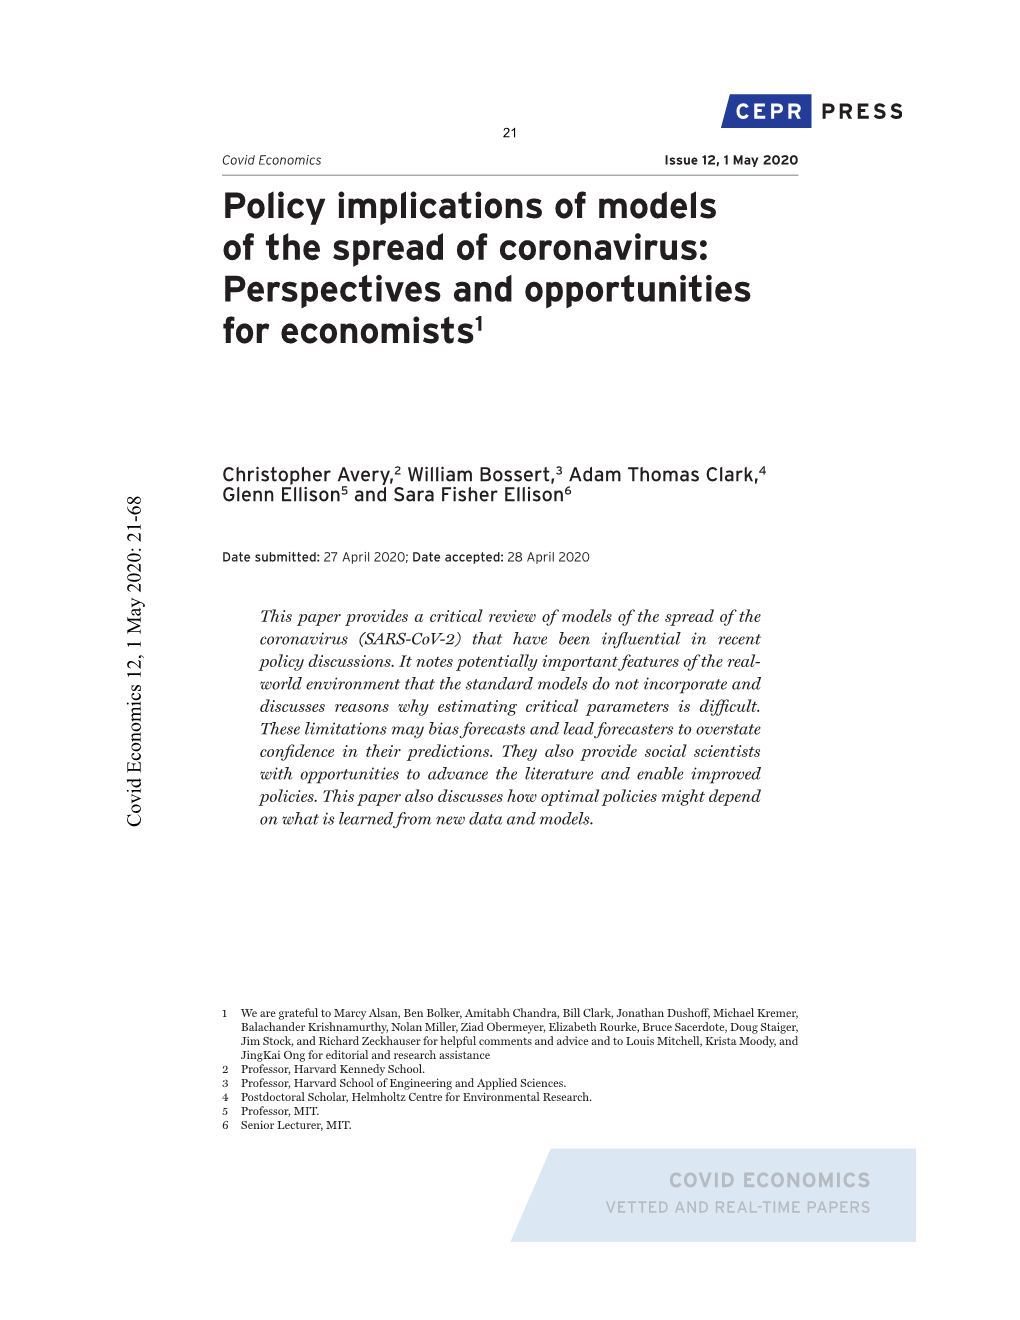 Policy Implications of Models of the Spread of Coronavirus: Perspectives and Opportunities for Economists1